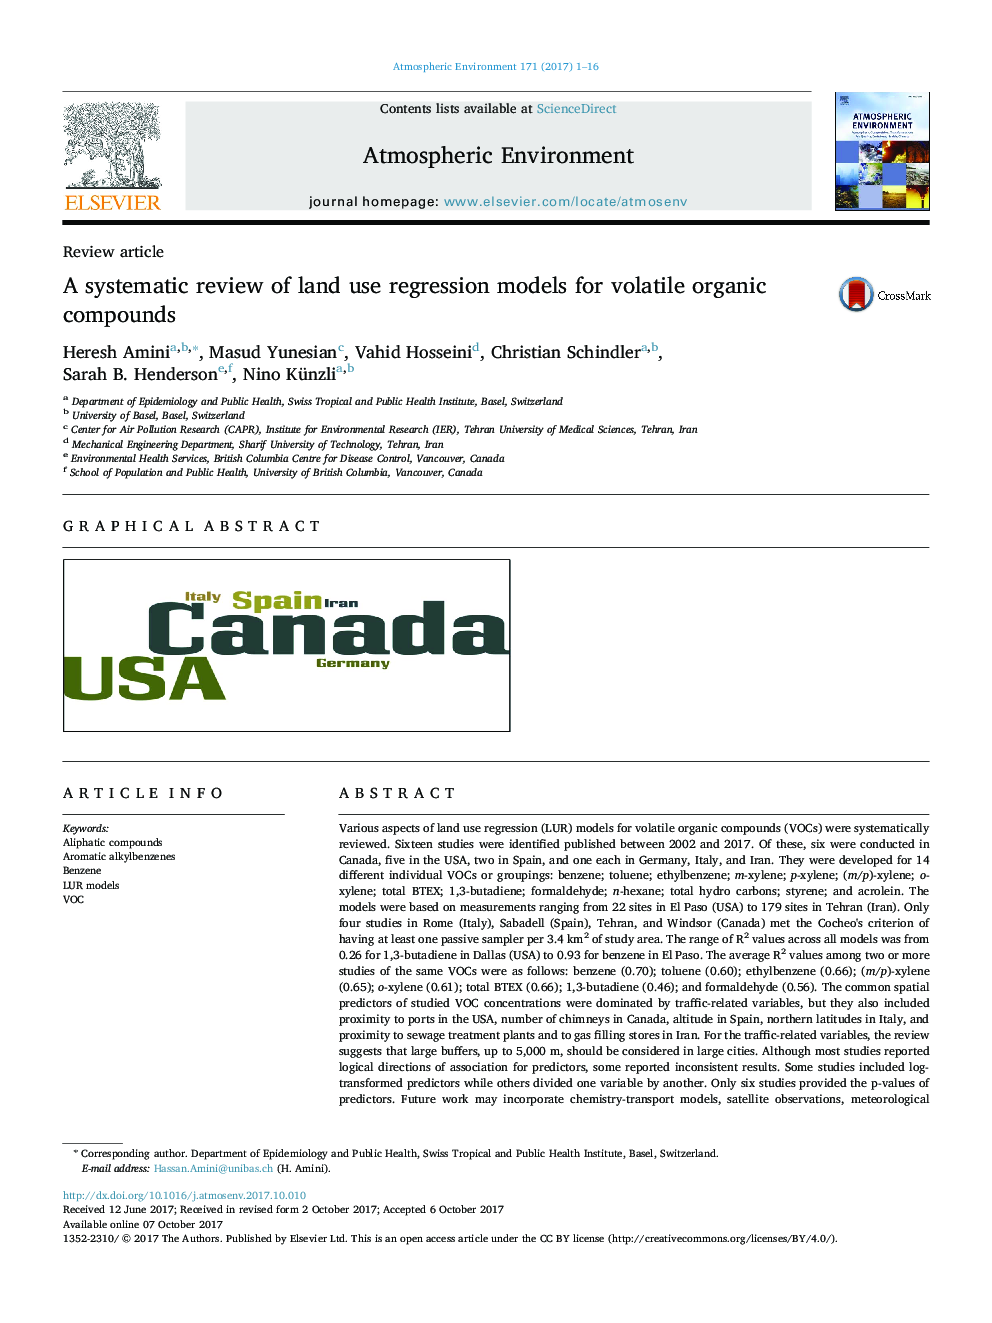 A systematic review of land use regression models for volatile organic compounds